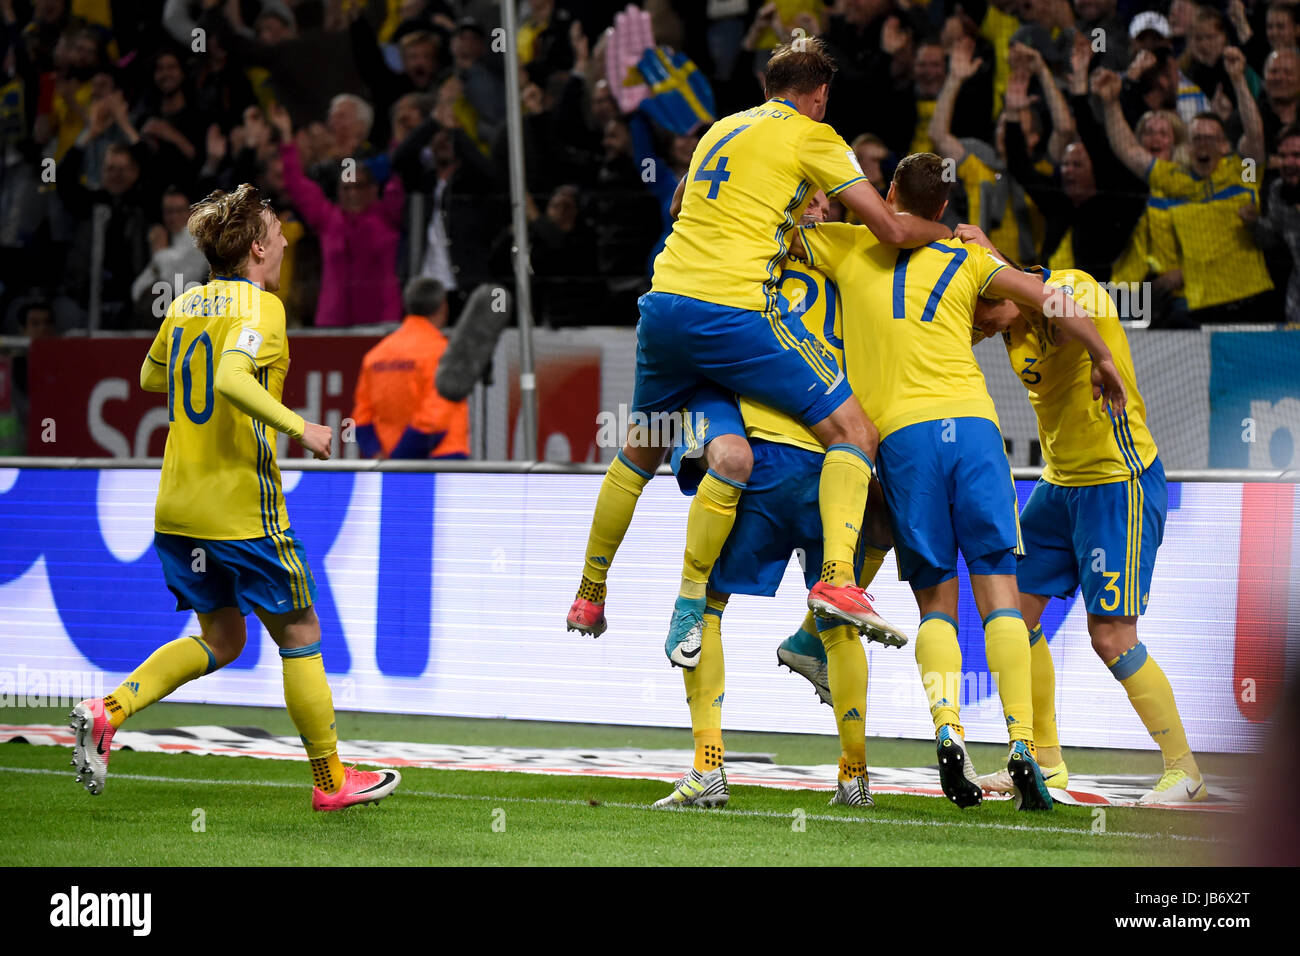 Stockholm, Sweden. 9th june, 2017. The Swedish team was very happy after the decive's goal in the qualifying game between Sweden and France. Credit: Johan Schefstrom/Frilansfotograferna/Alamy Live News Stock Photo